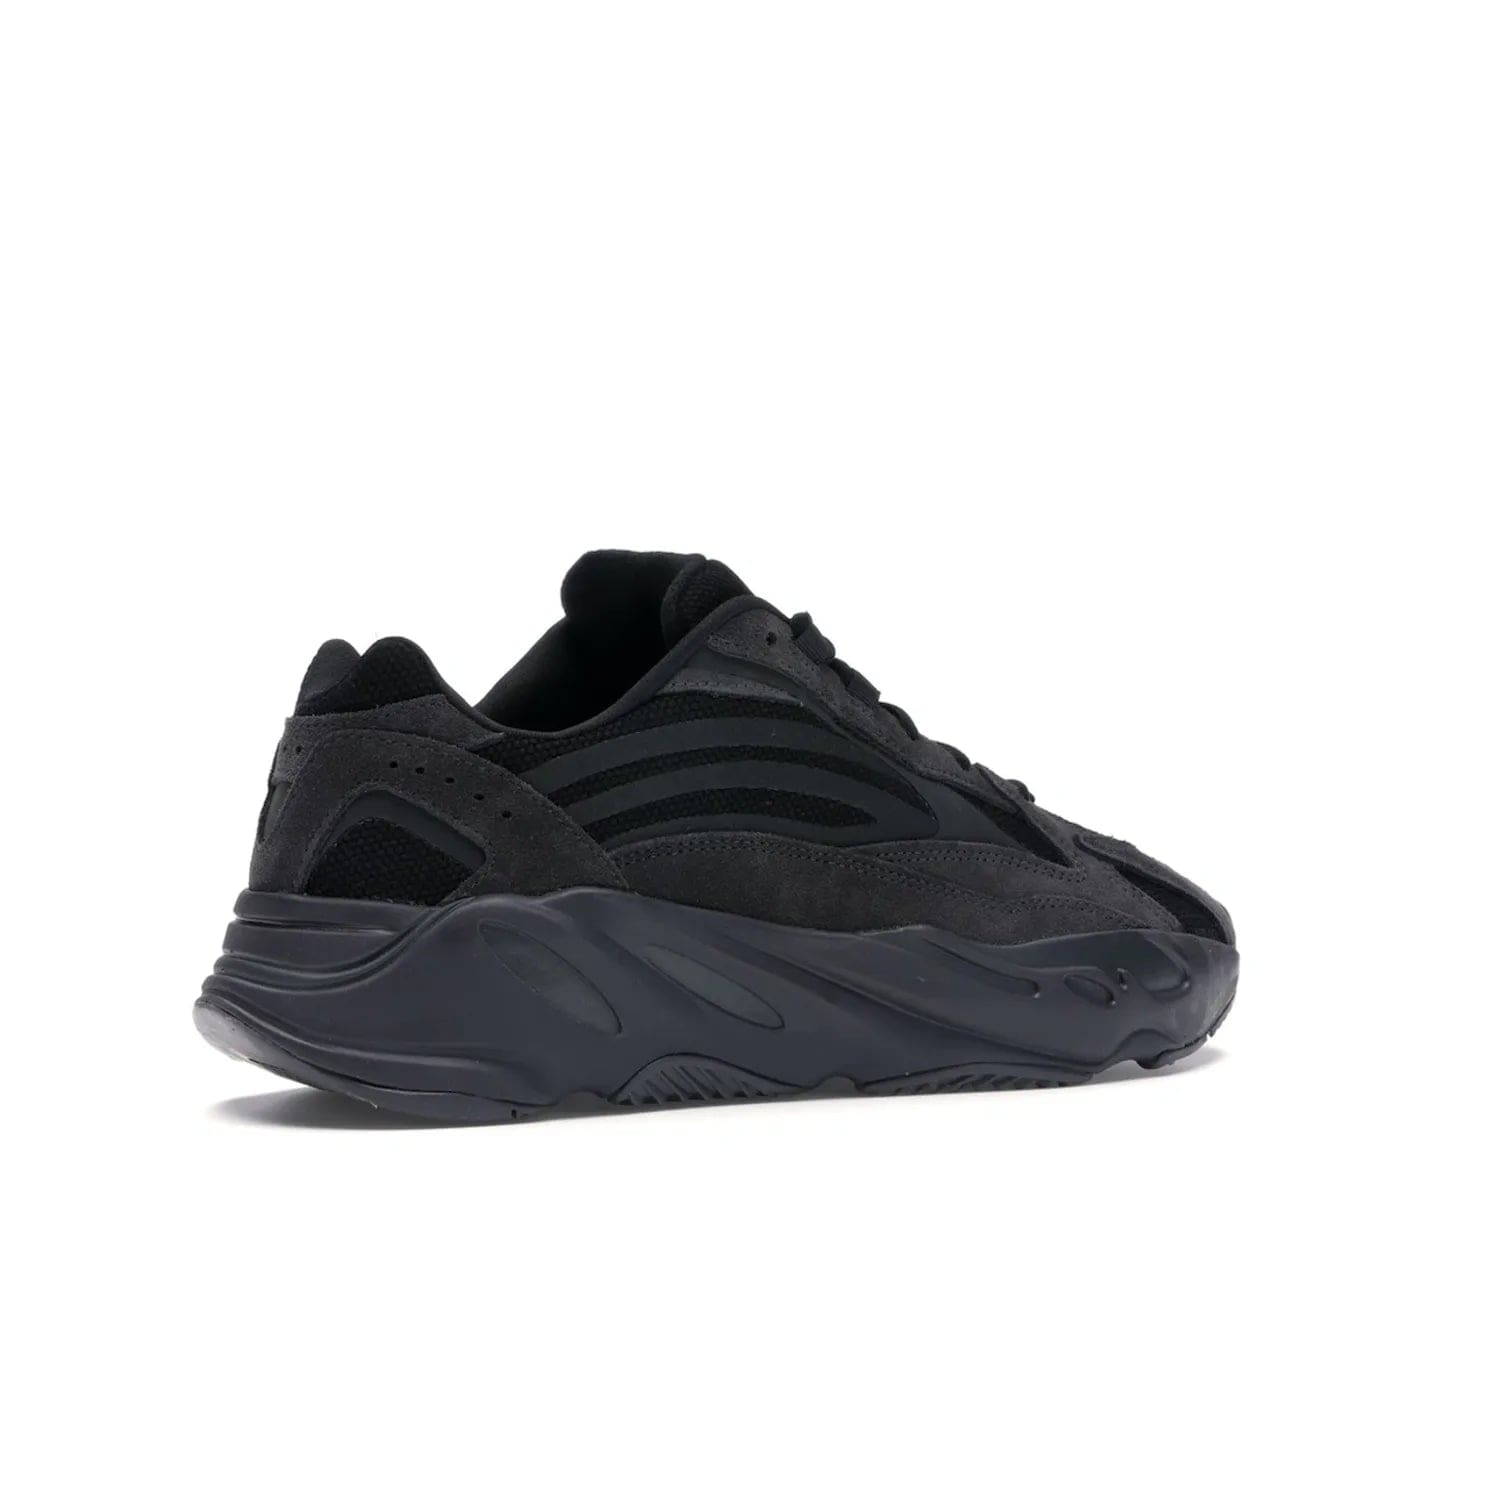 adidas Yeezy Boost 700 V2 Vanta - Image 34 - Only at www.BallersClubKickz.com - Introducing the adidas Yeezy Boost 700 V2 Vanta - a sleek and stylish all-black design featuring a combination of mesh, leather, and suede construction with signature Boost cushioning in the sole. The ultimate in comfort and support.